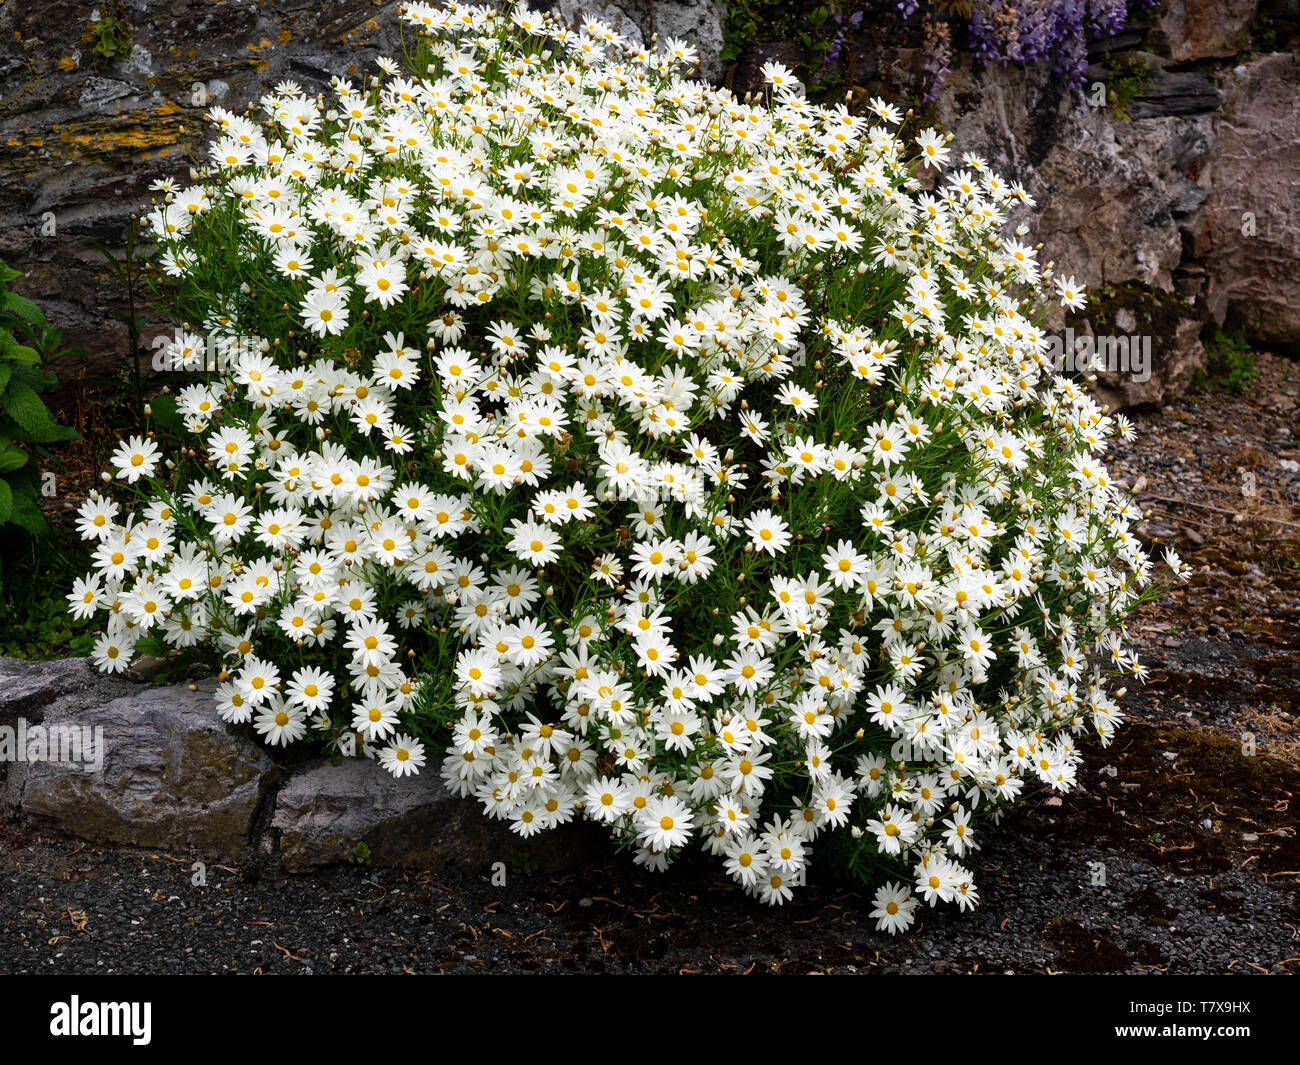 Single white flowers of the half-hardy Marguerite daisy, Argyranthemum frutescens, smother the shrubby growth Stock Photo